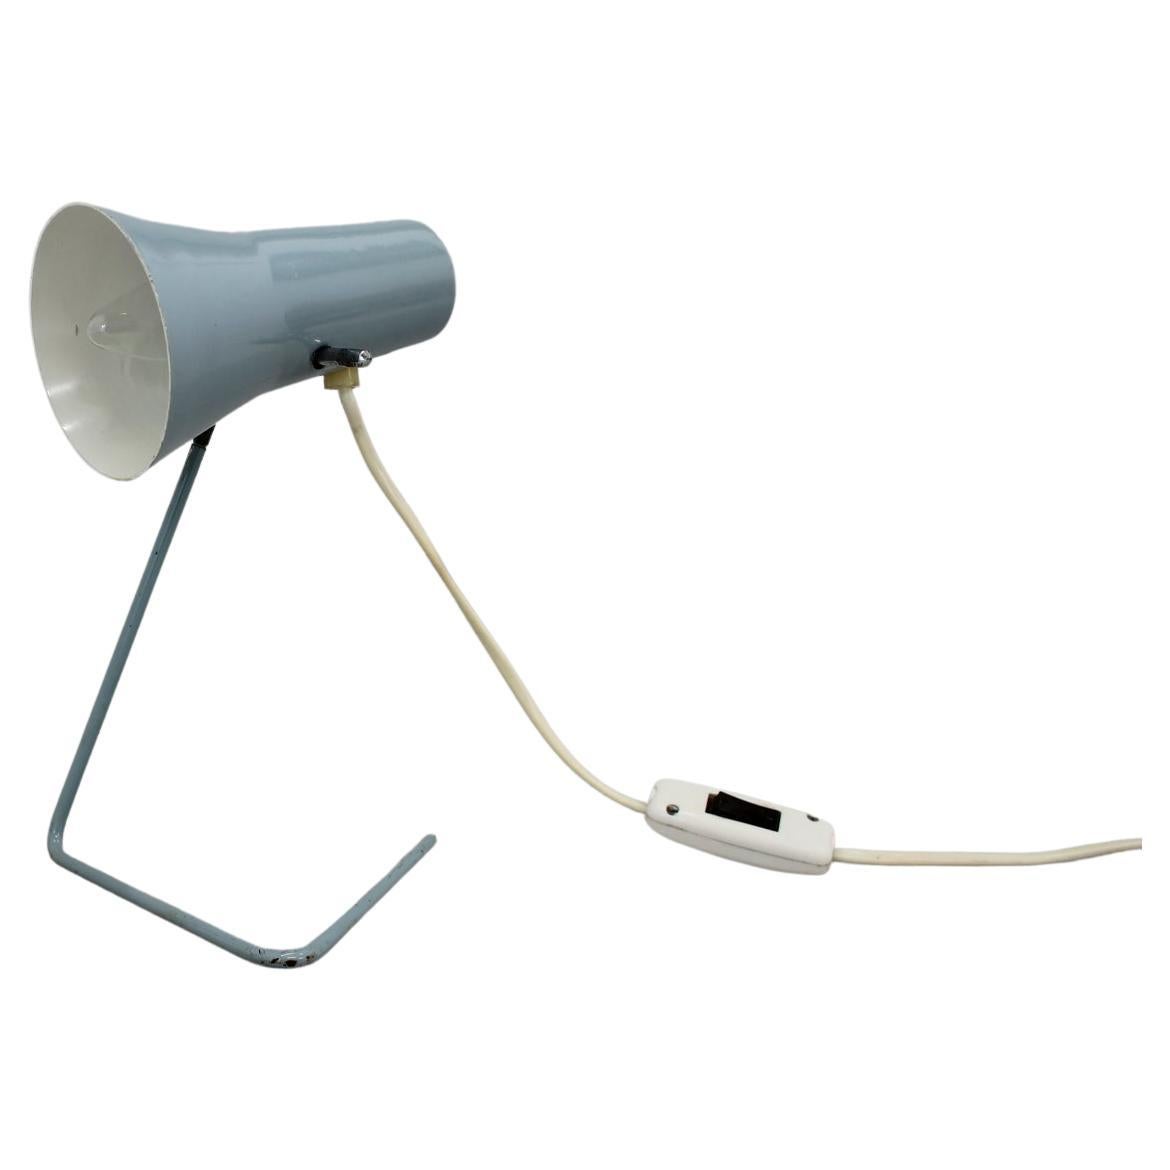 Table Lamp with Adjustable Shade by Hurka for Drupol, 1960s For Sale